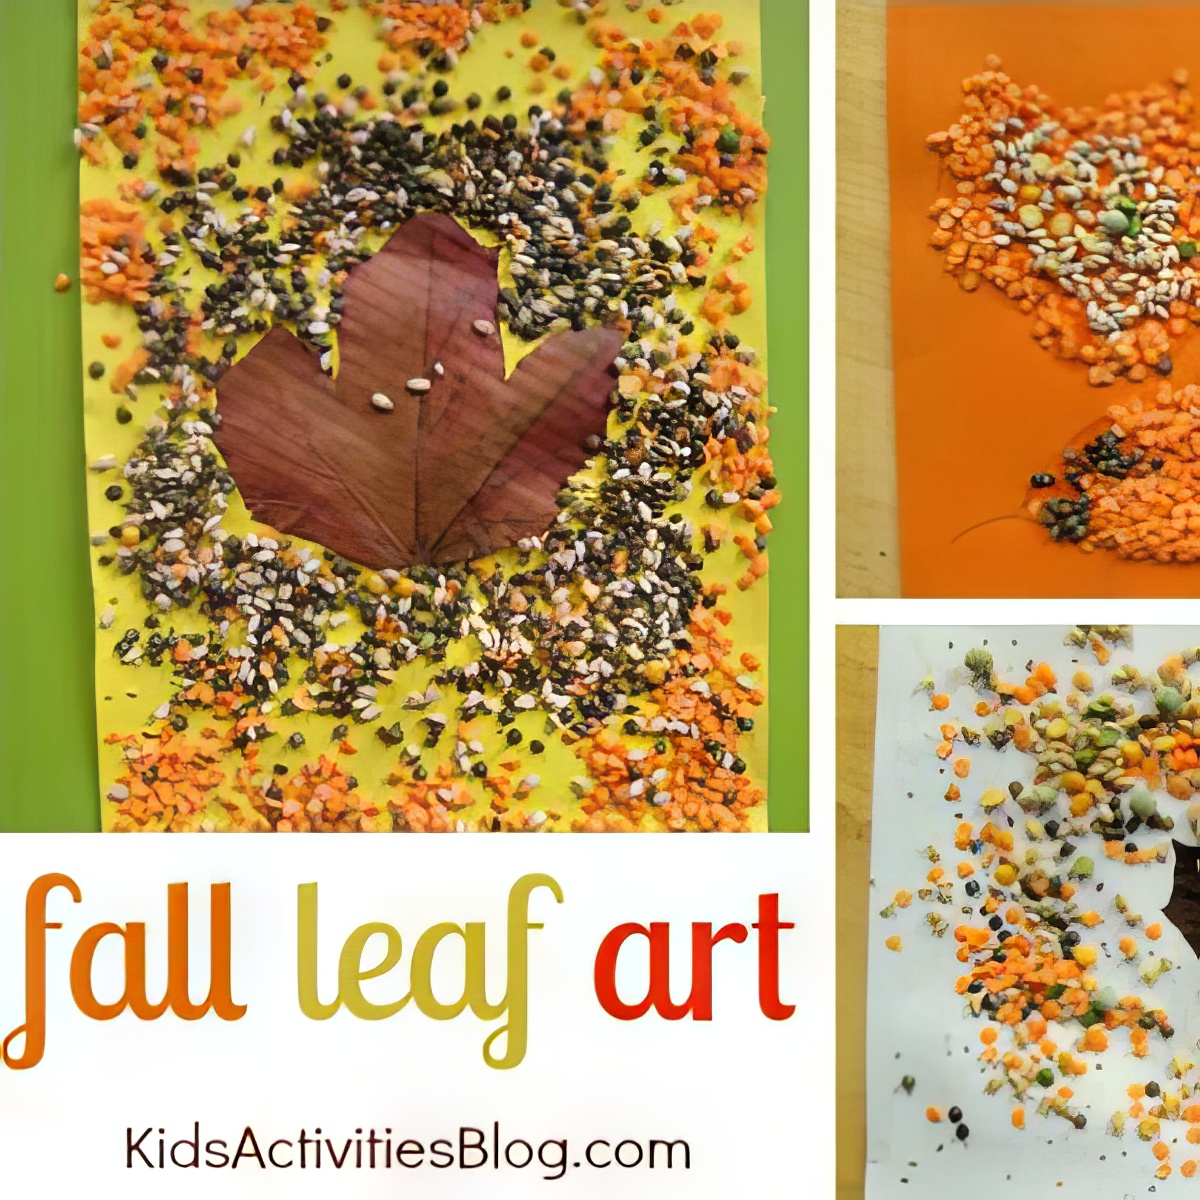 fall-leaf-art, 13-leafy-crafts-and-activities-for-kids, creative leaf crafts for kids